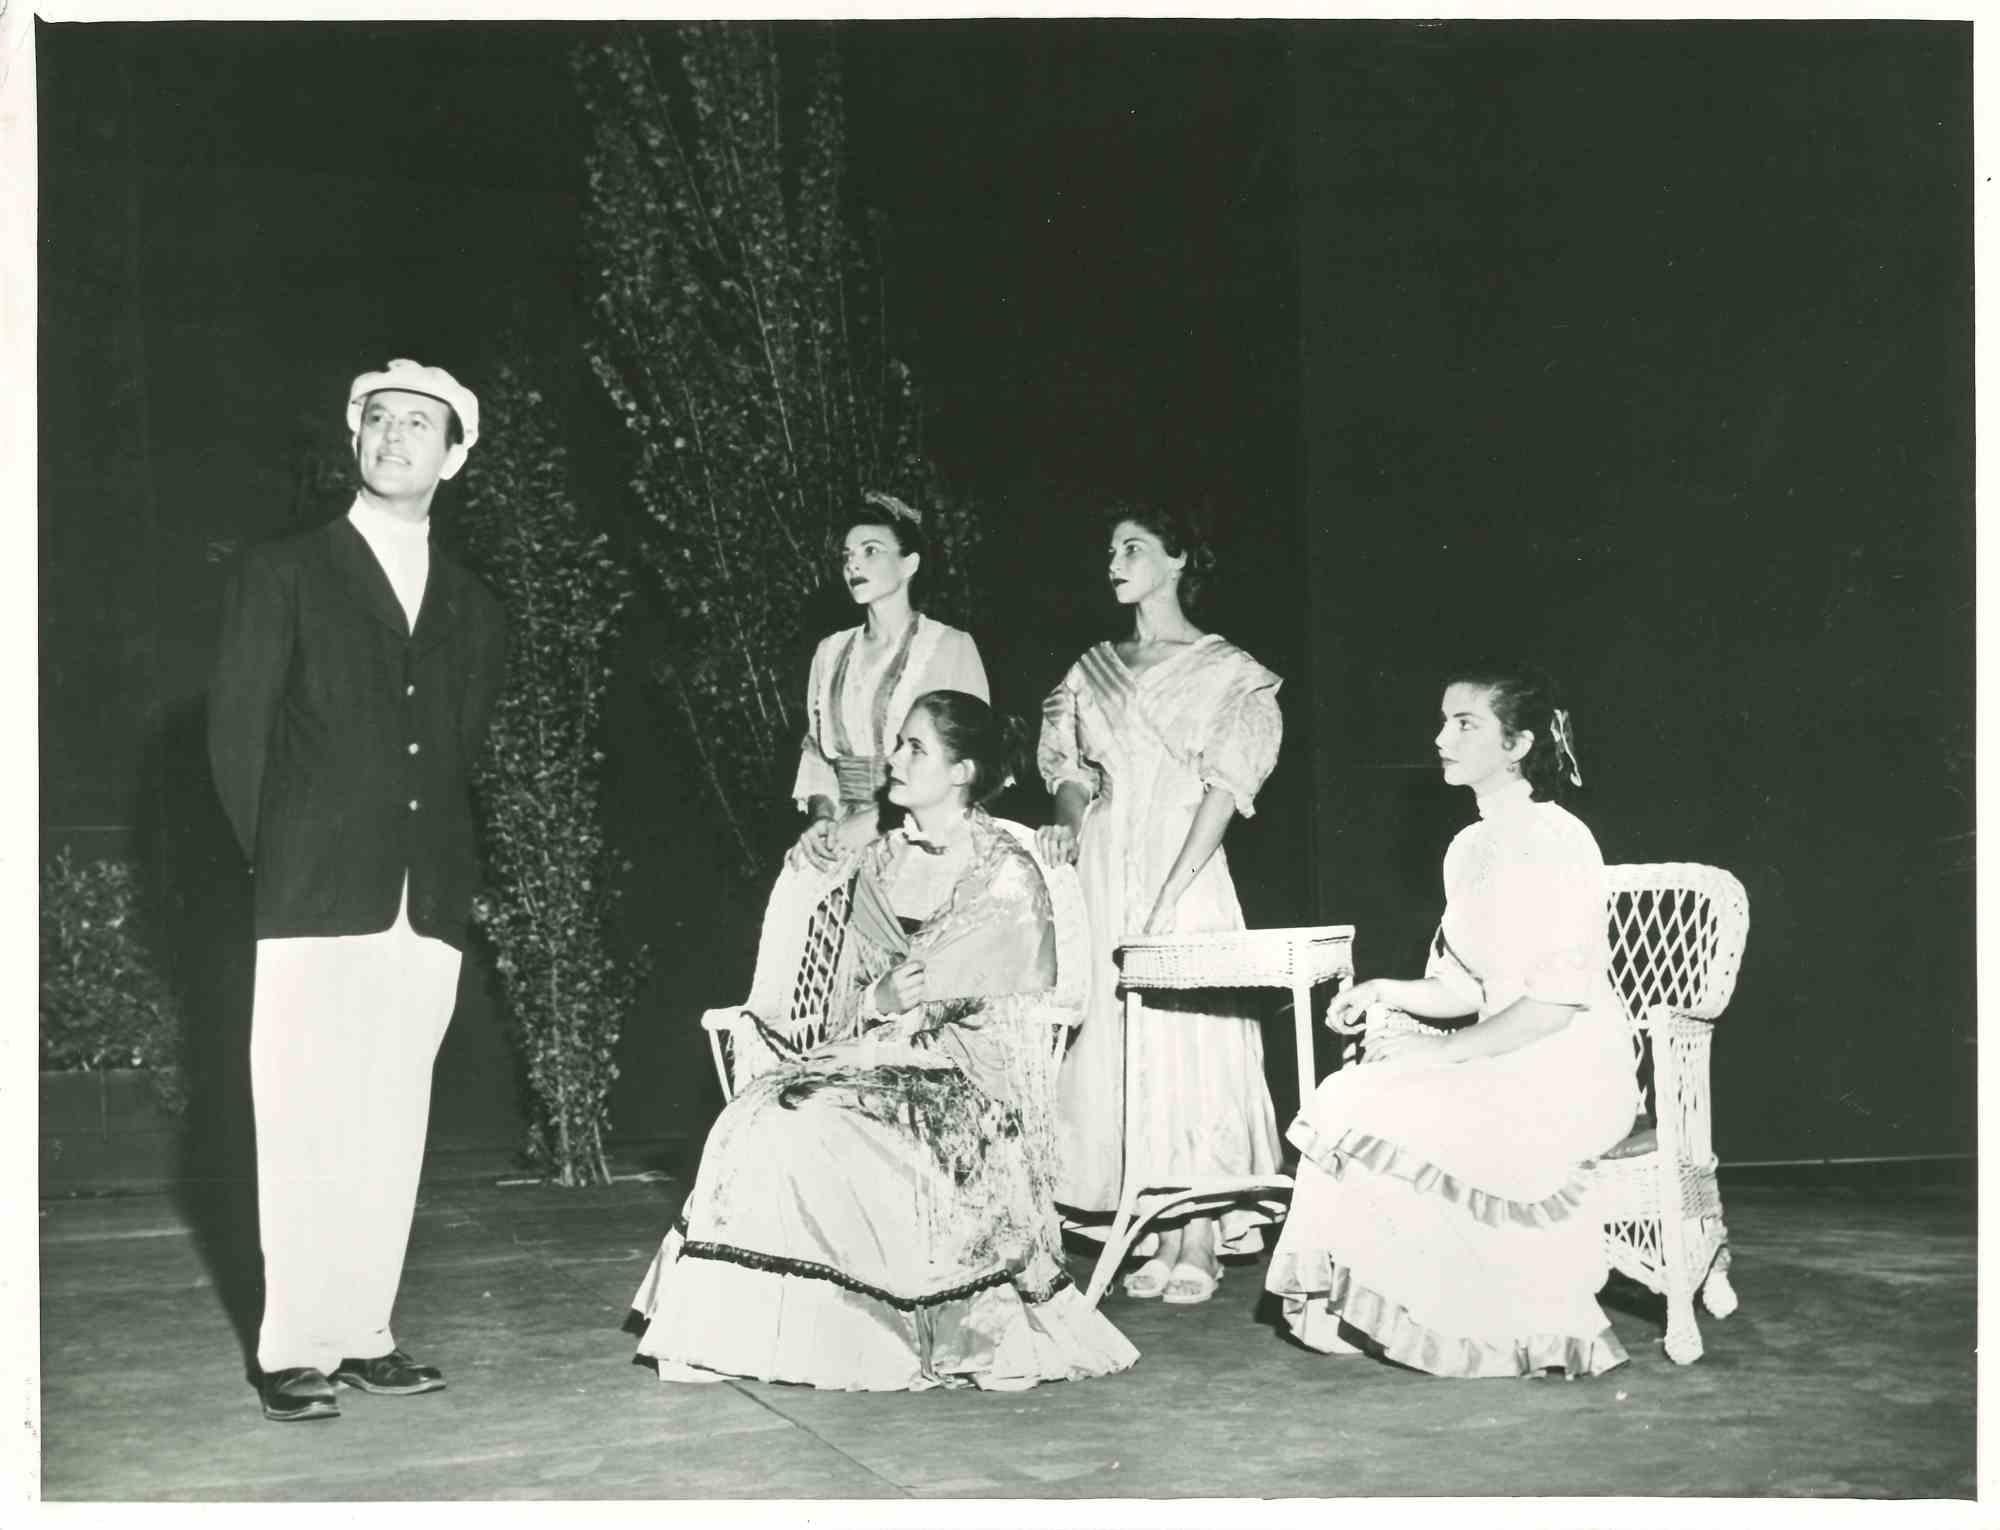 Unknown Figurative Photograph - Outdoor Drama Portrays Life of Woodrow Wilson - Photograph - Mid 20th Century